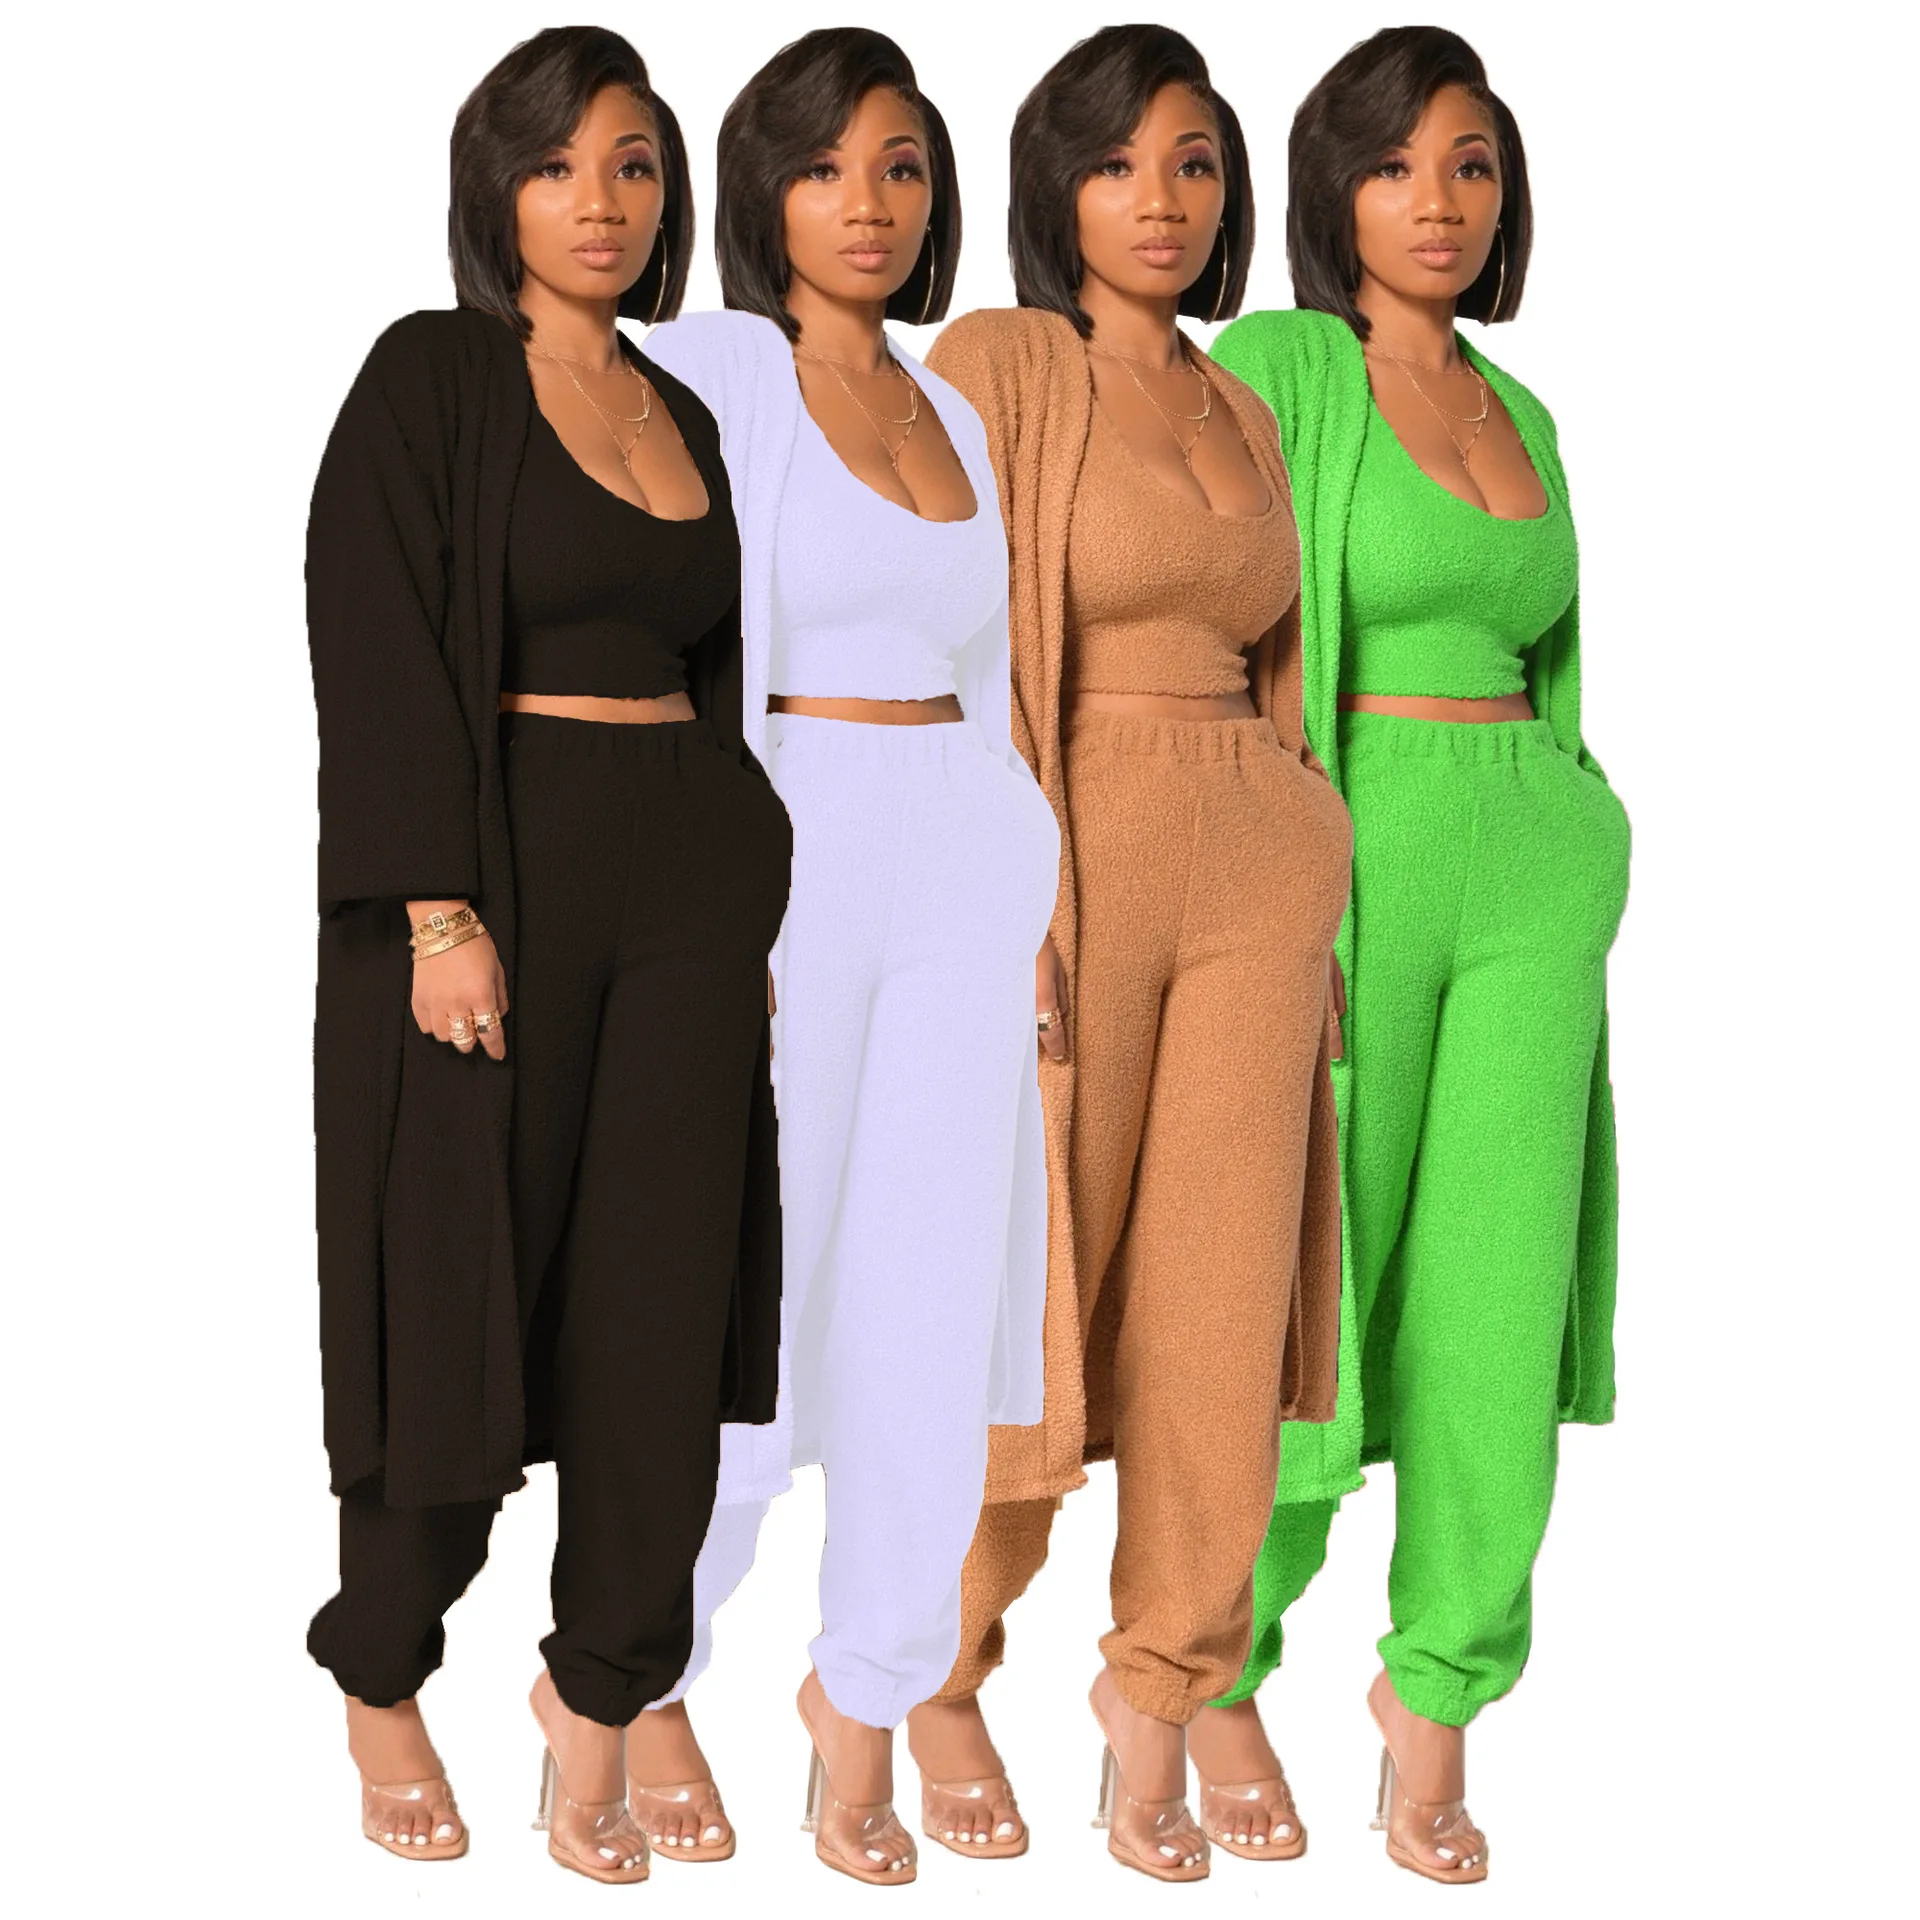 

2021 Winter hot casual long sleeve plush solid color loose-fitting loungewear three-piece set women's sets